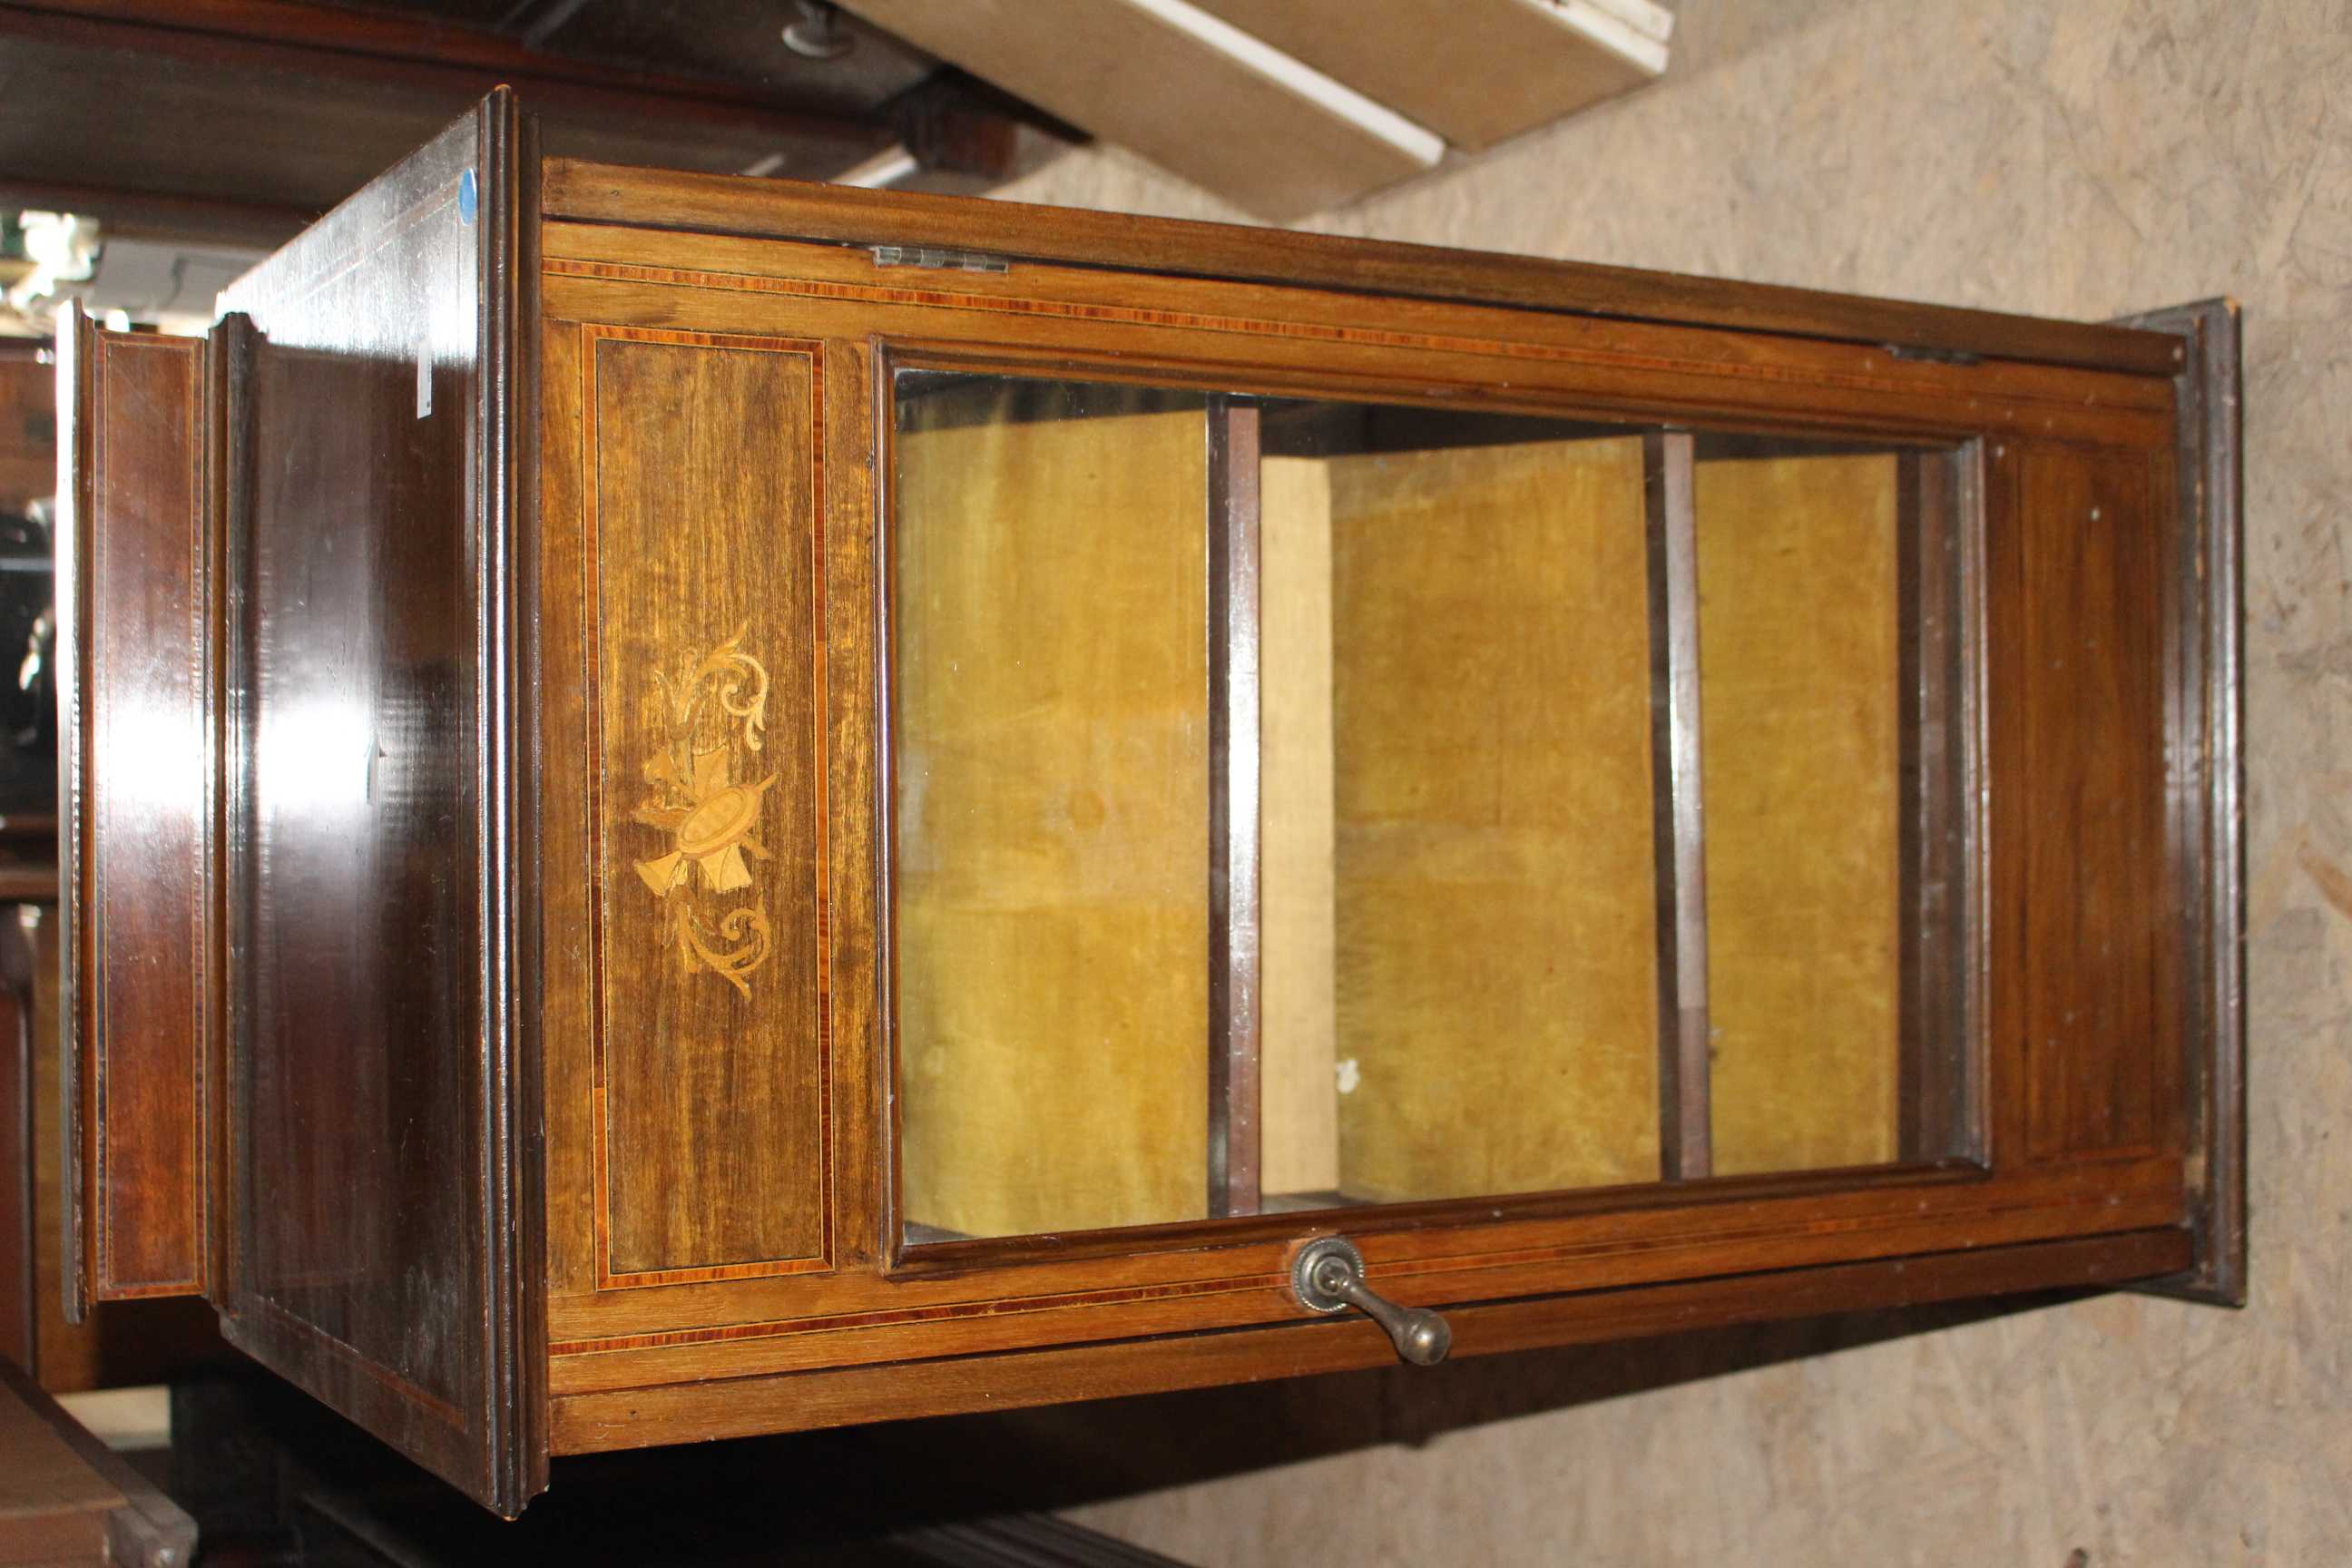 An Edwardian mahogany inlaid, glass fronted music cabinet. (1)